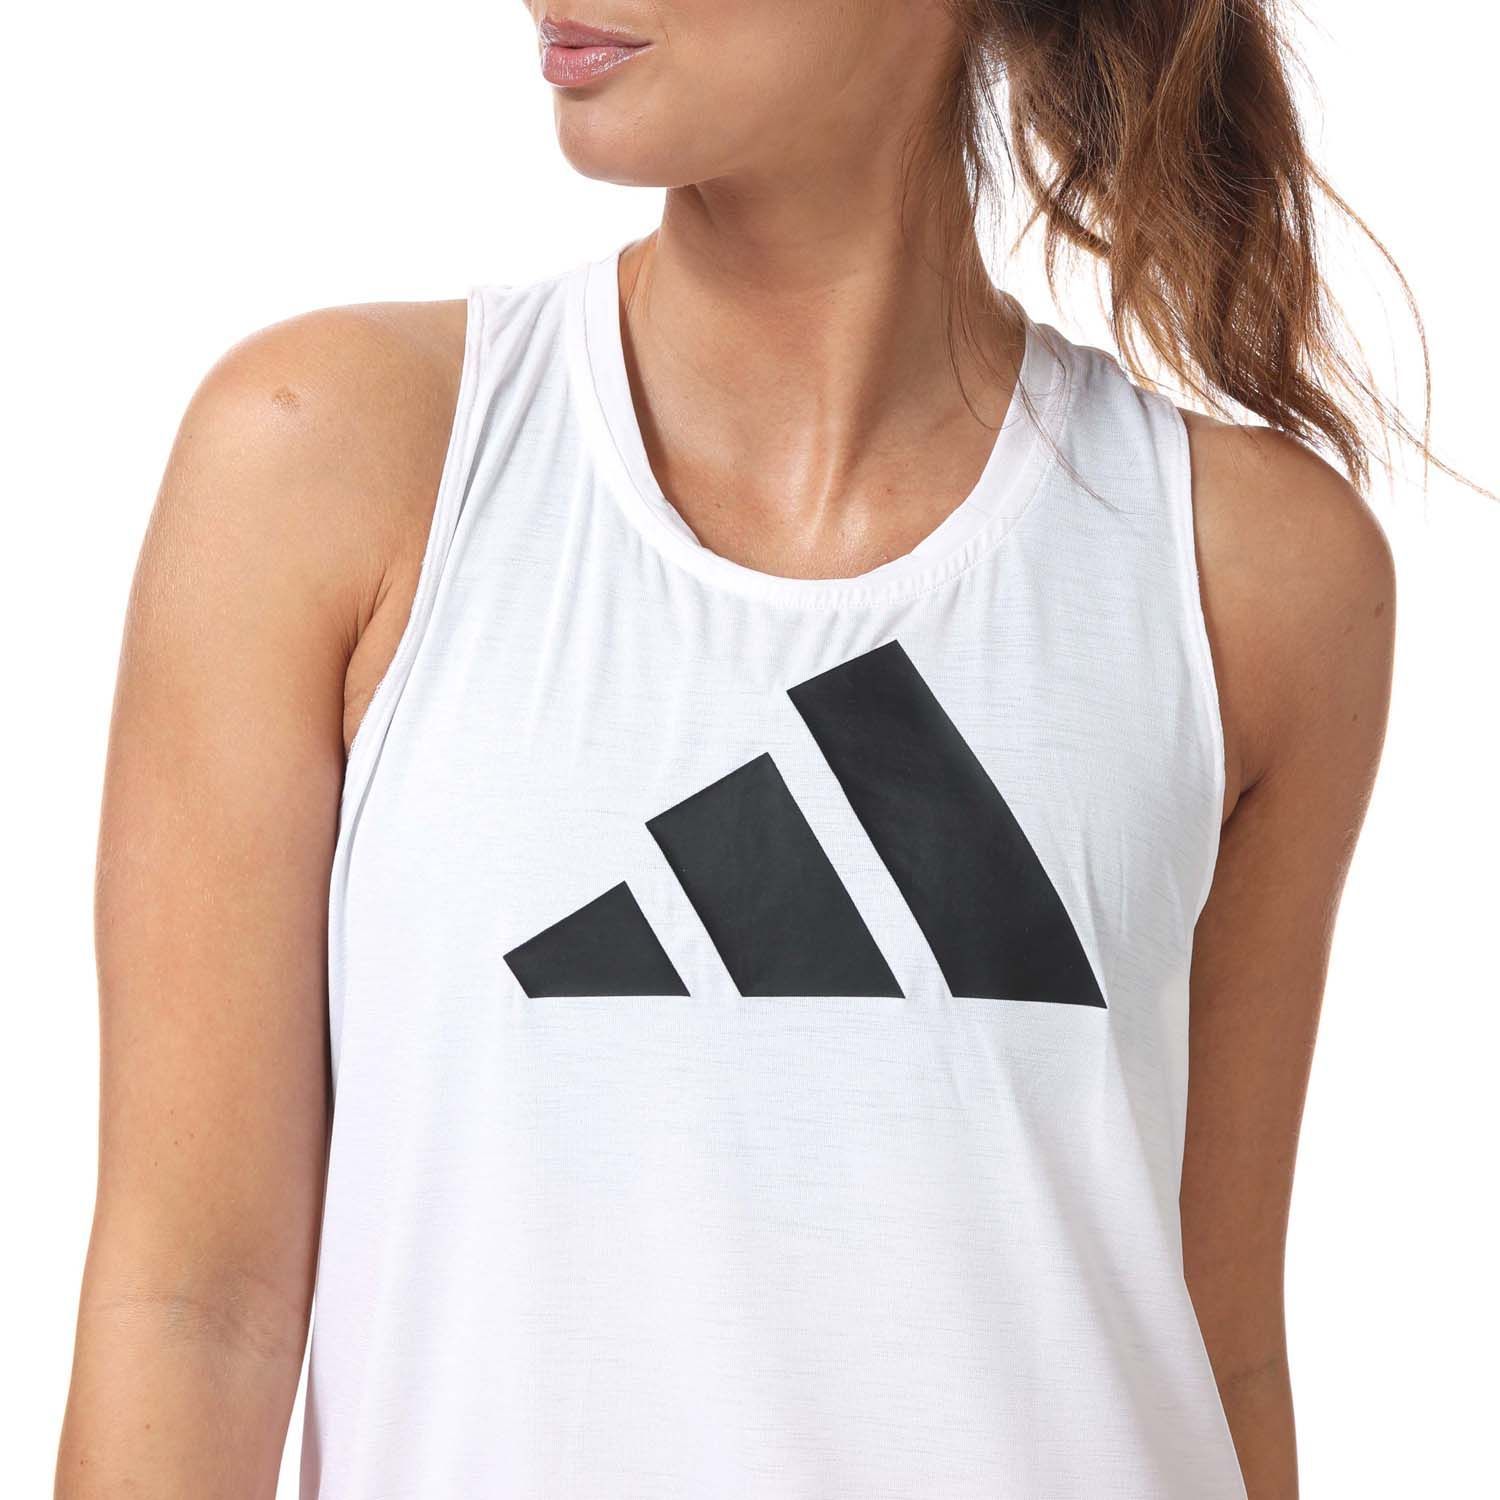 Womens adidas 3- Stripes Logo Tank Top in white black.- Crewneck.- Sleeveless.- Racerback with cutout.- Moisture absorbing.- Scoop hem.- Regular fit.- Main Material: 81% Polyester (Recycled)  19% Elastane.- Ref: GR8054